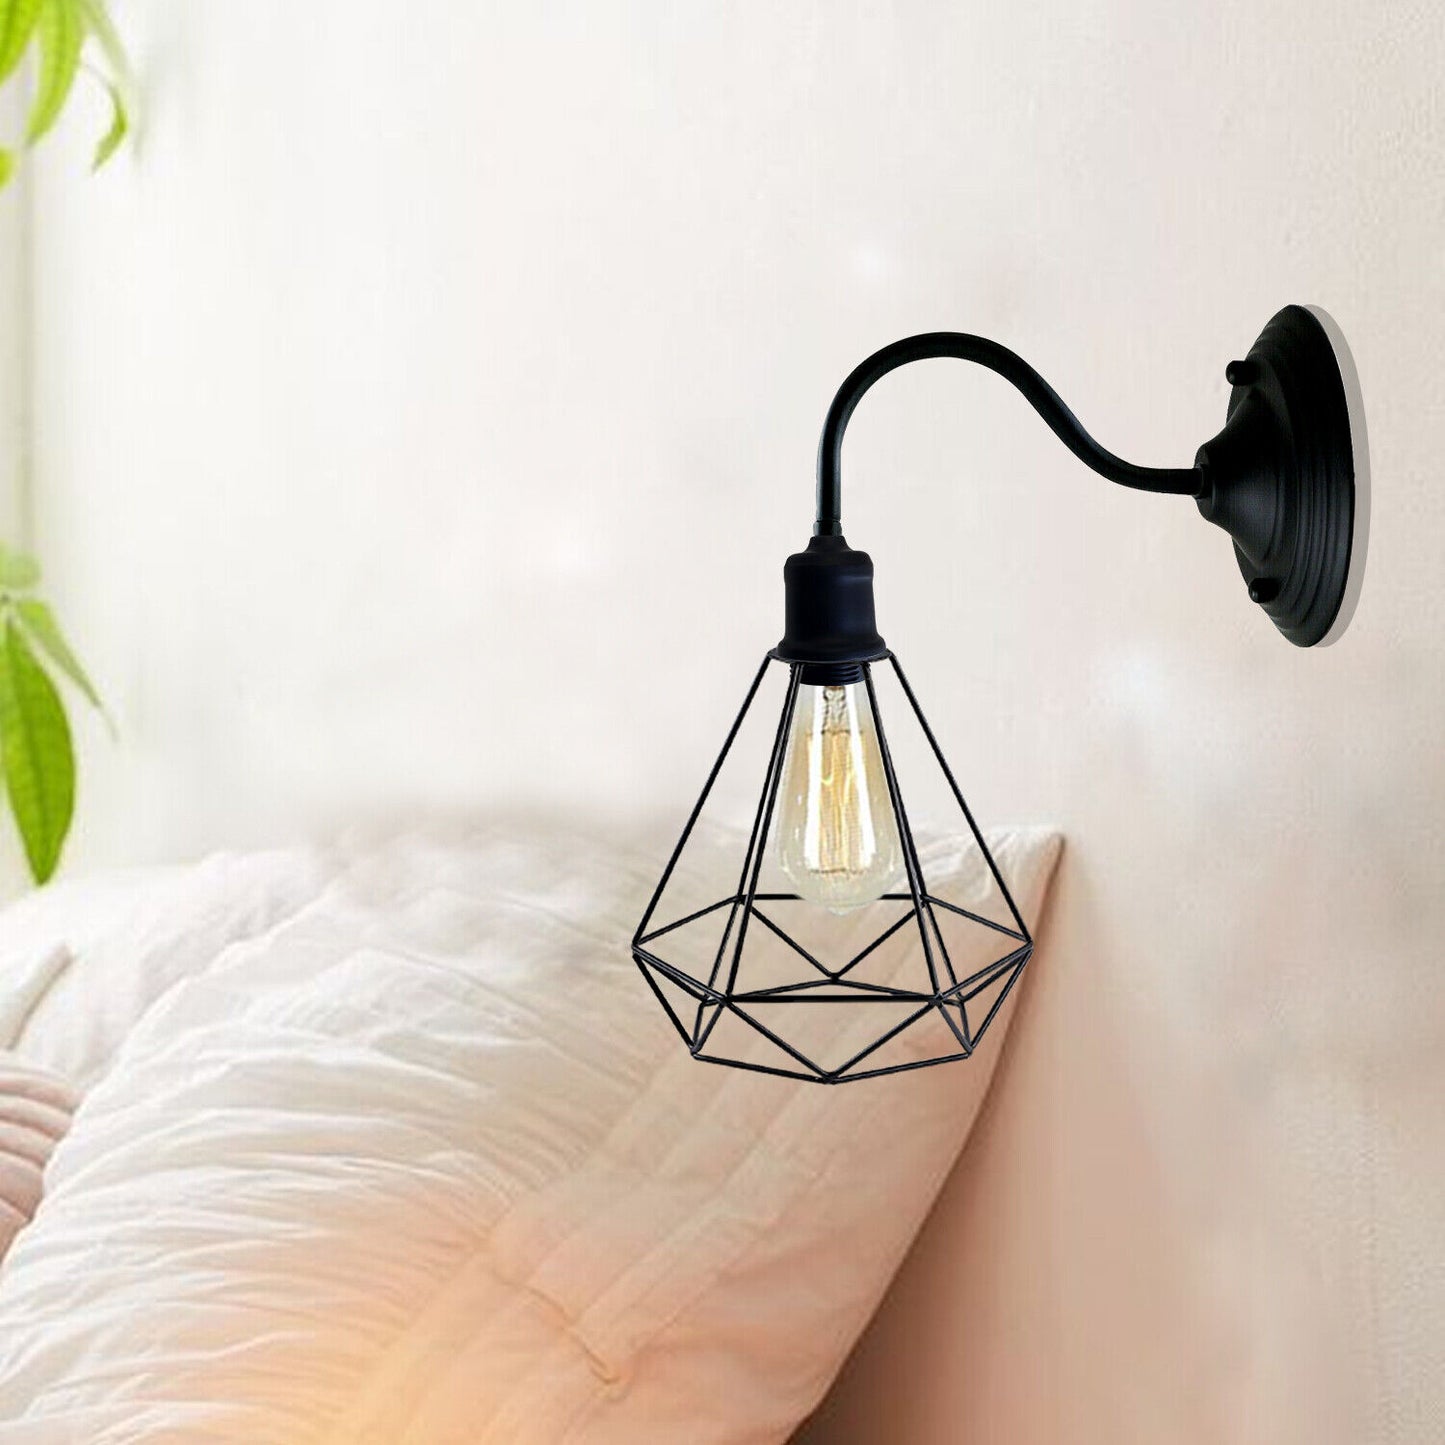 Vintage Industrial Wall Lights for Living Room&Bedroom - Elegant Metal Diamond shape Wall Sconce in Classic Industrial Style-Application image